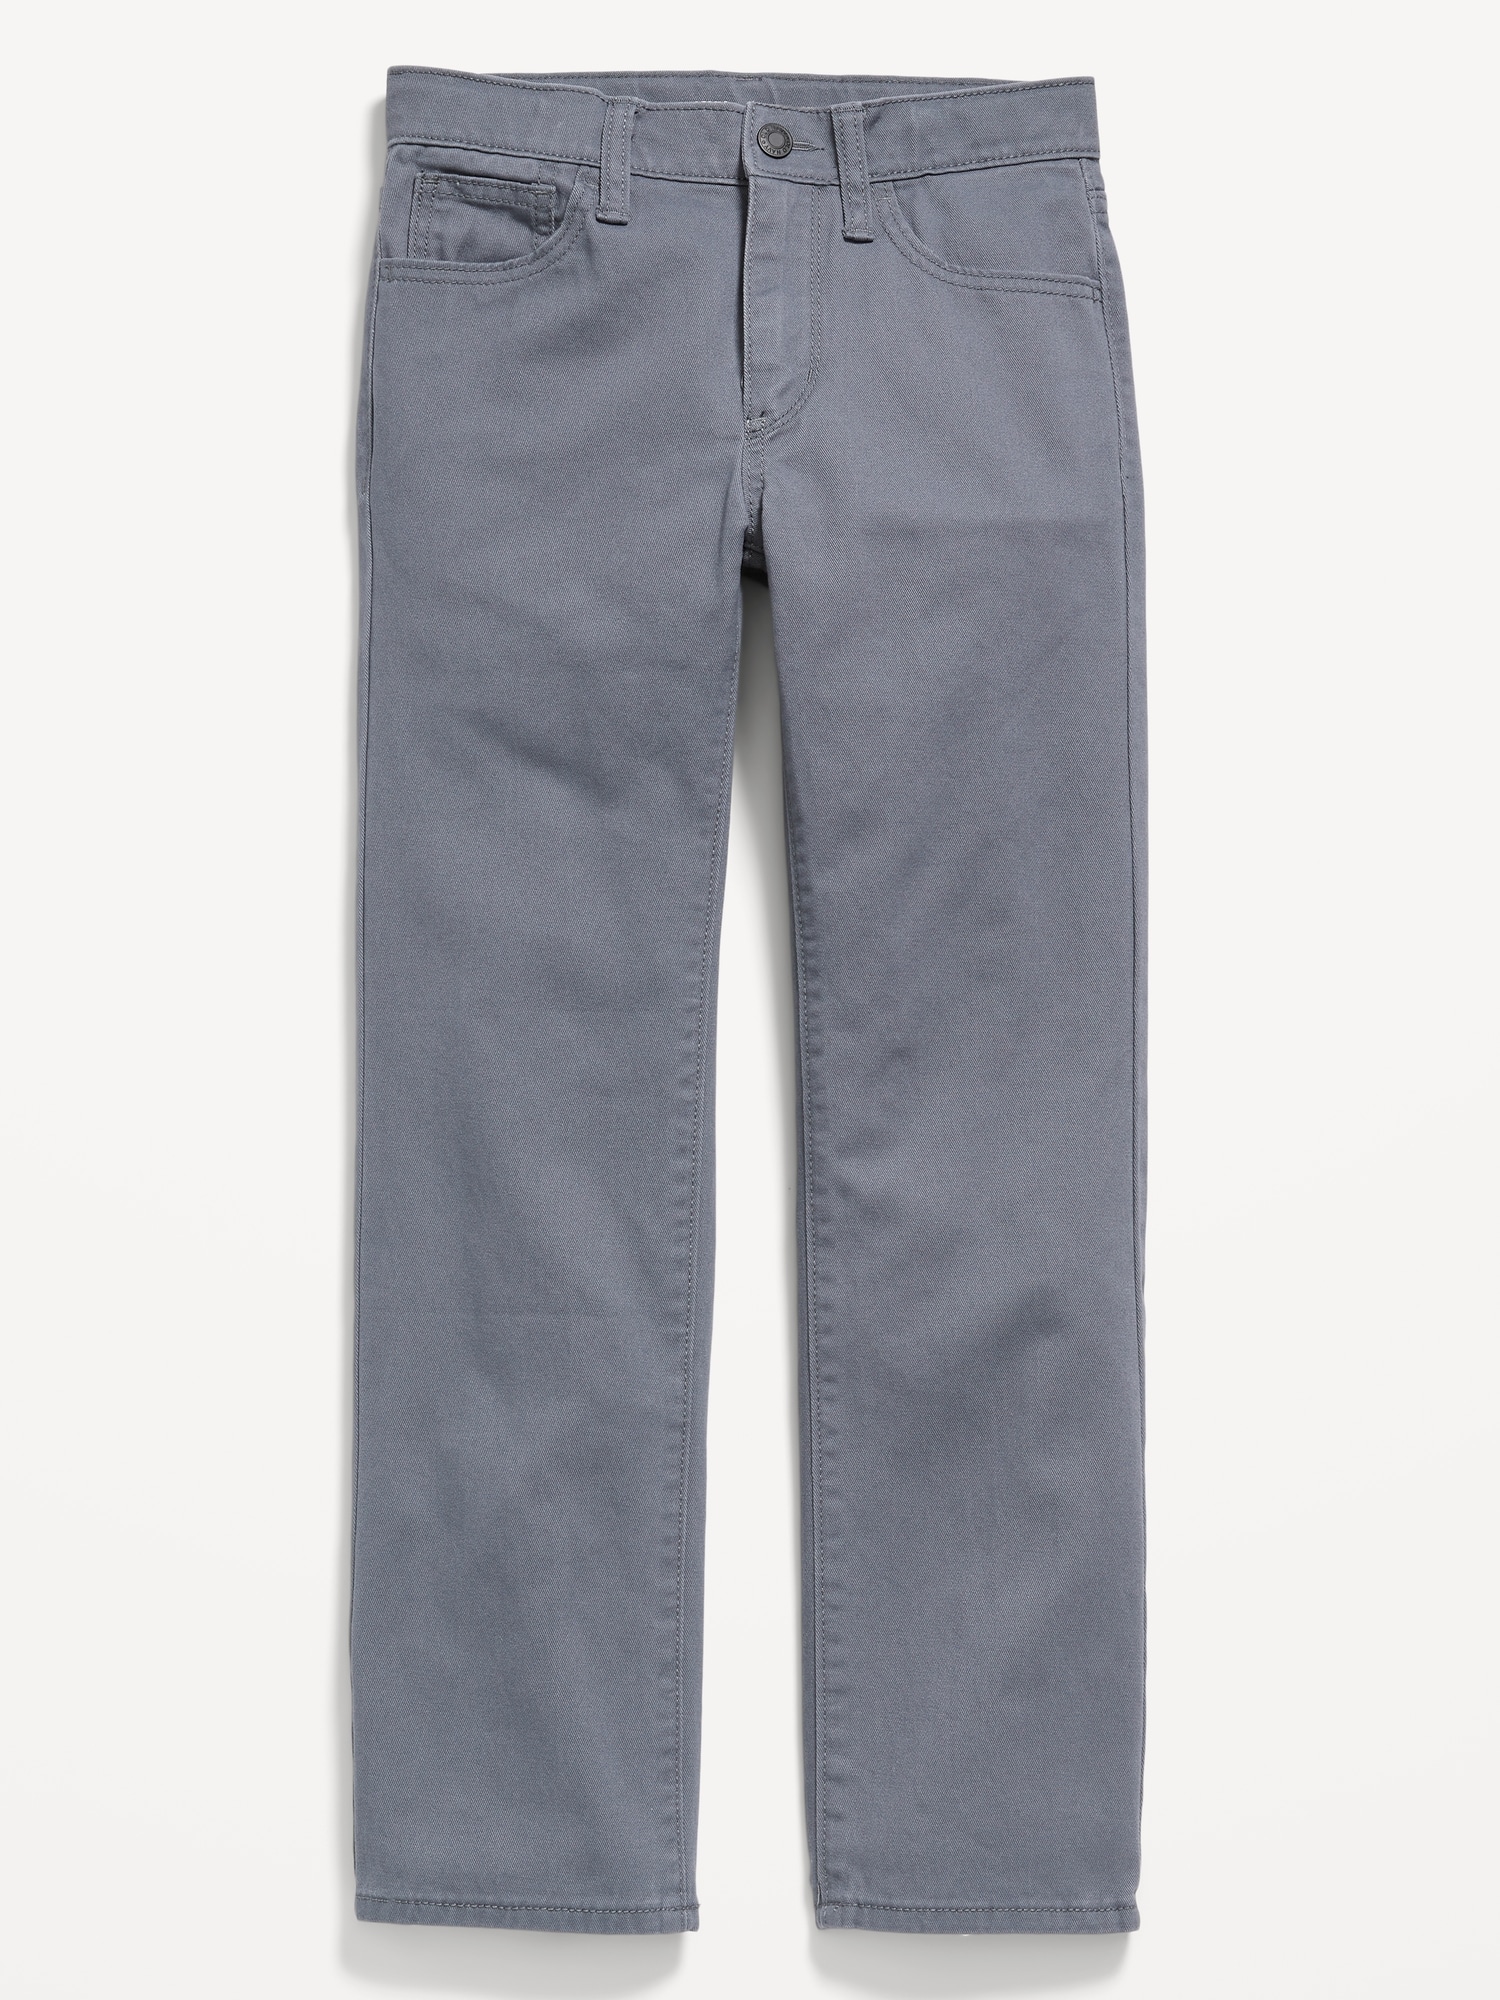 Wow Straight Non-Stretch Jeans For Boys Hot Deal